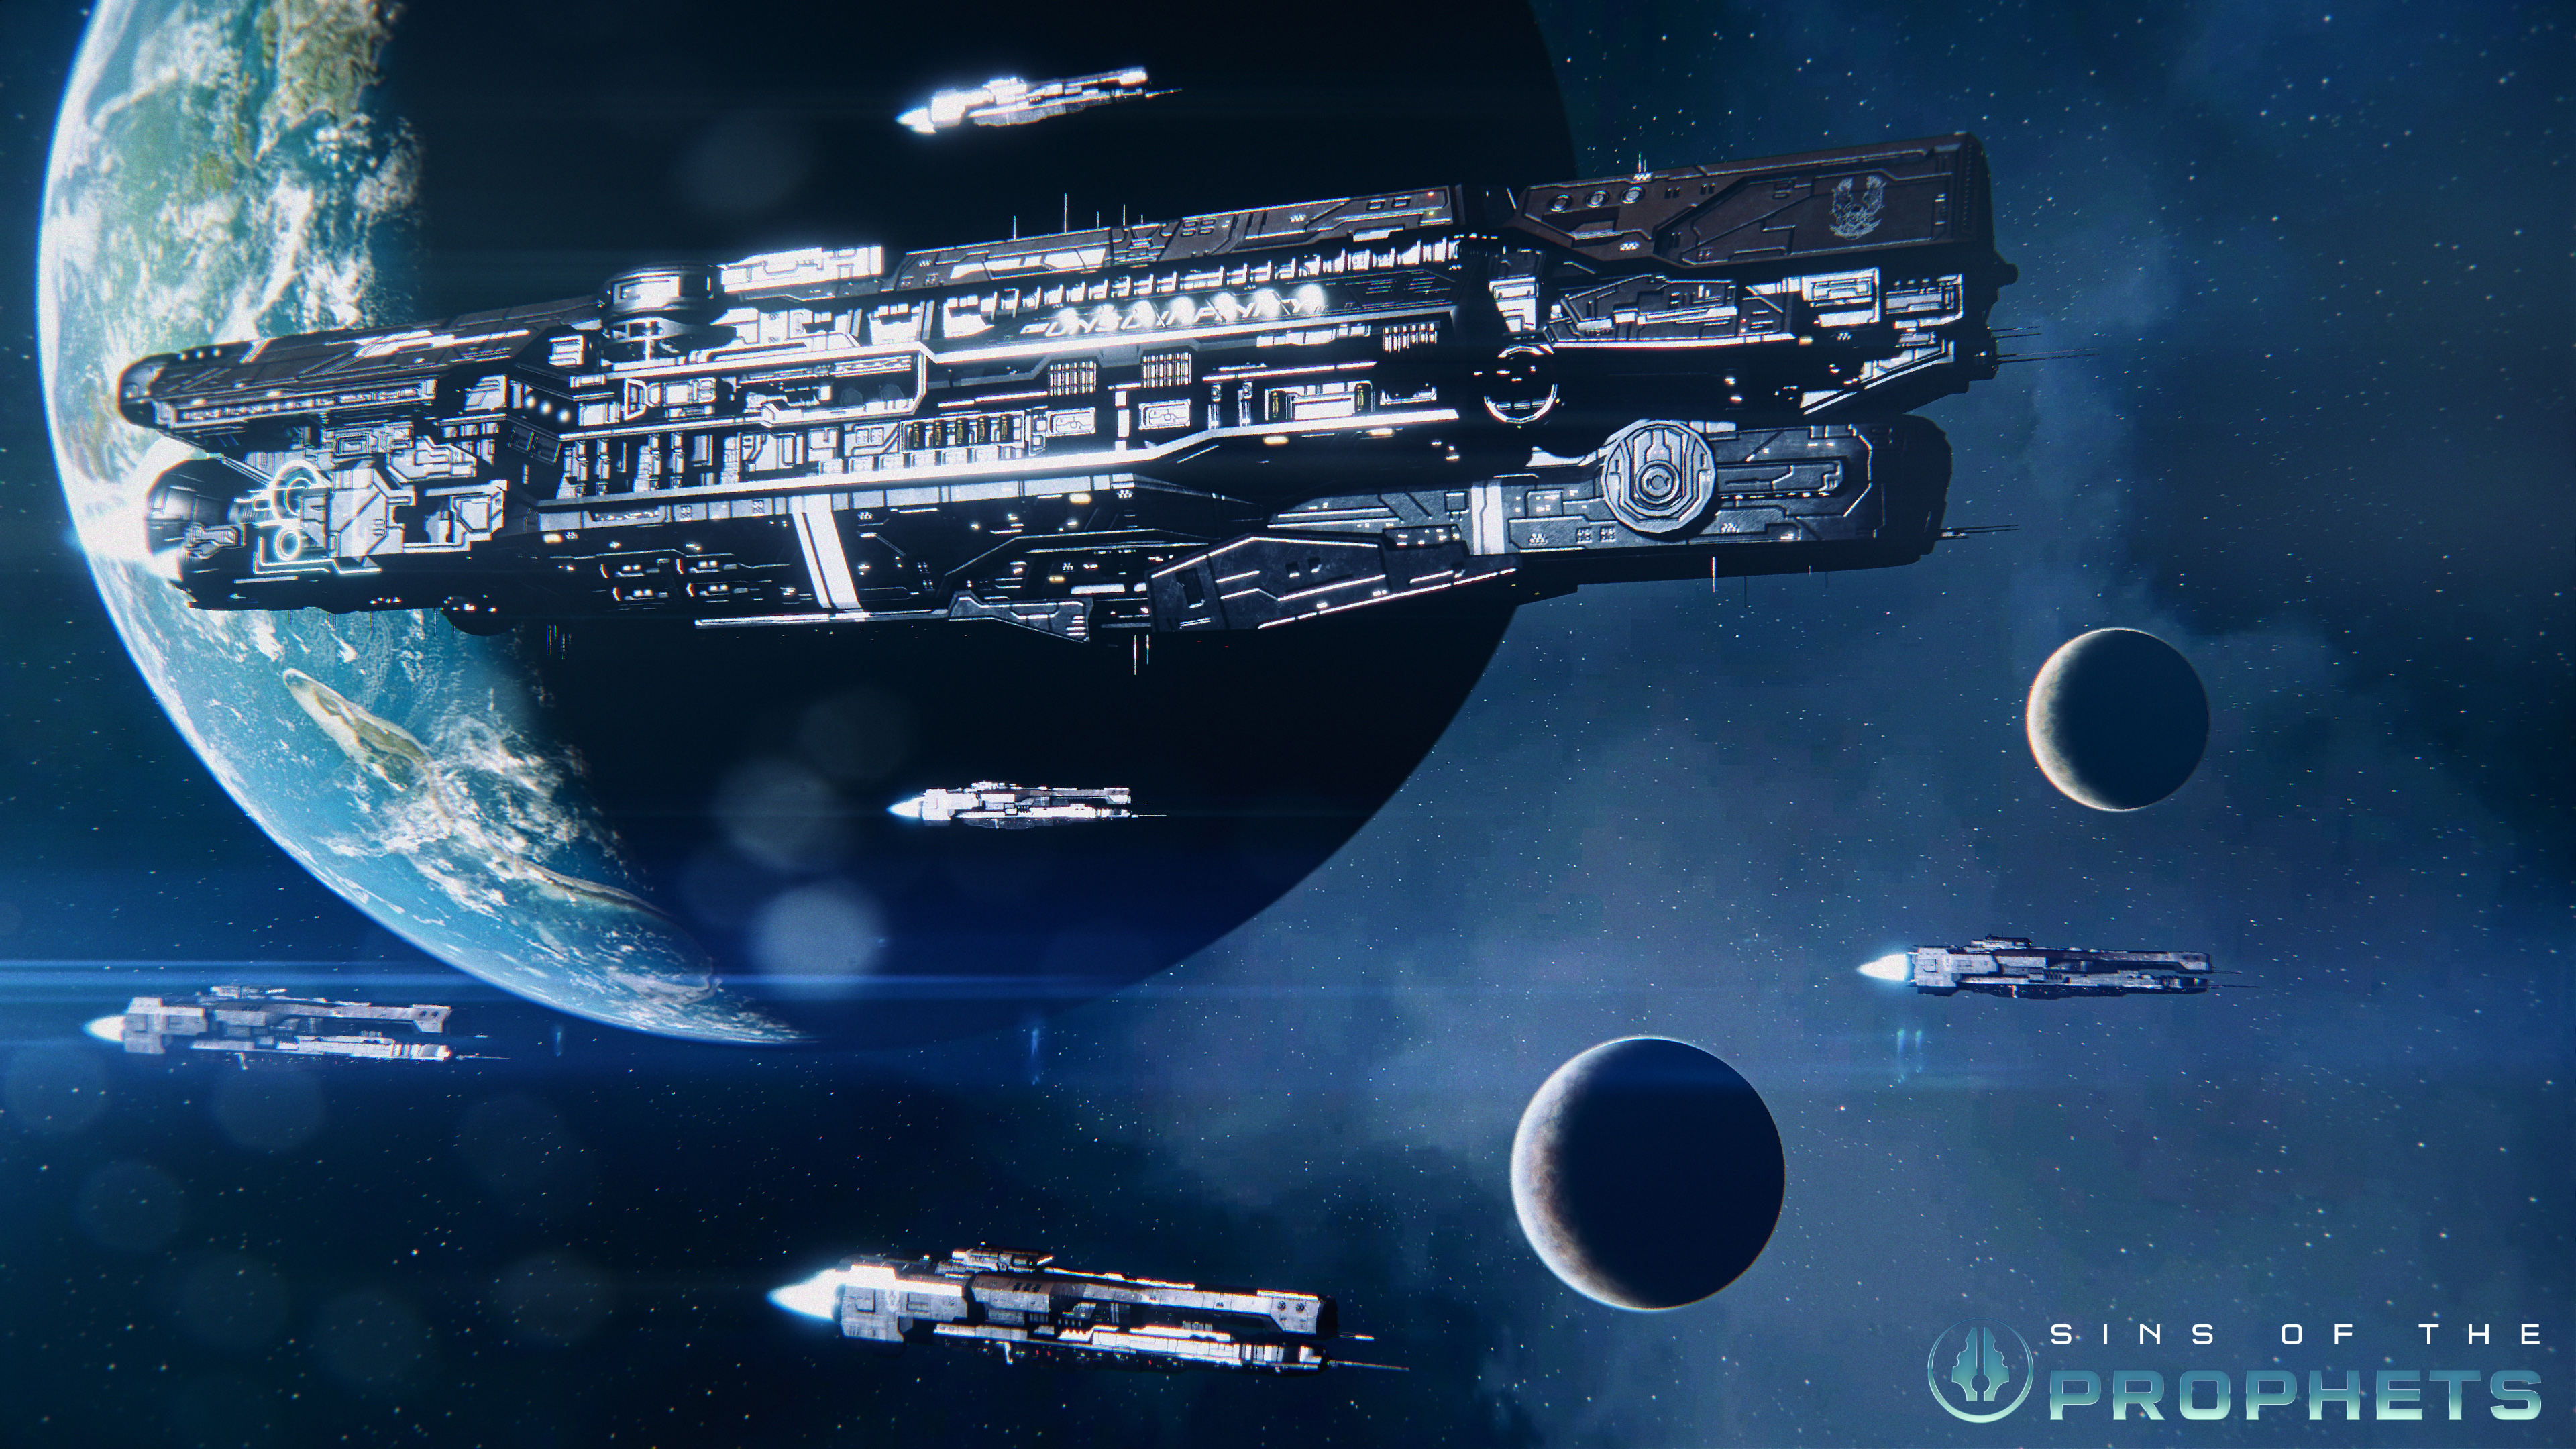 Report Rss Unsc Infinity Wallpaper - Sins Of The Prophets , HD Wallpaper & Backgrounds